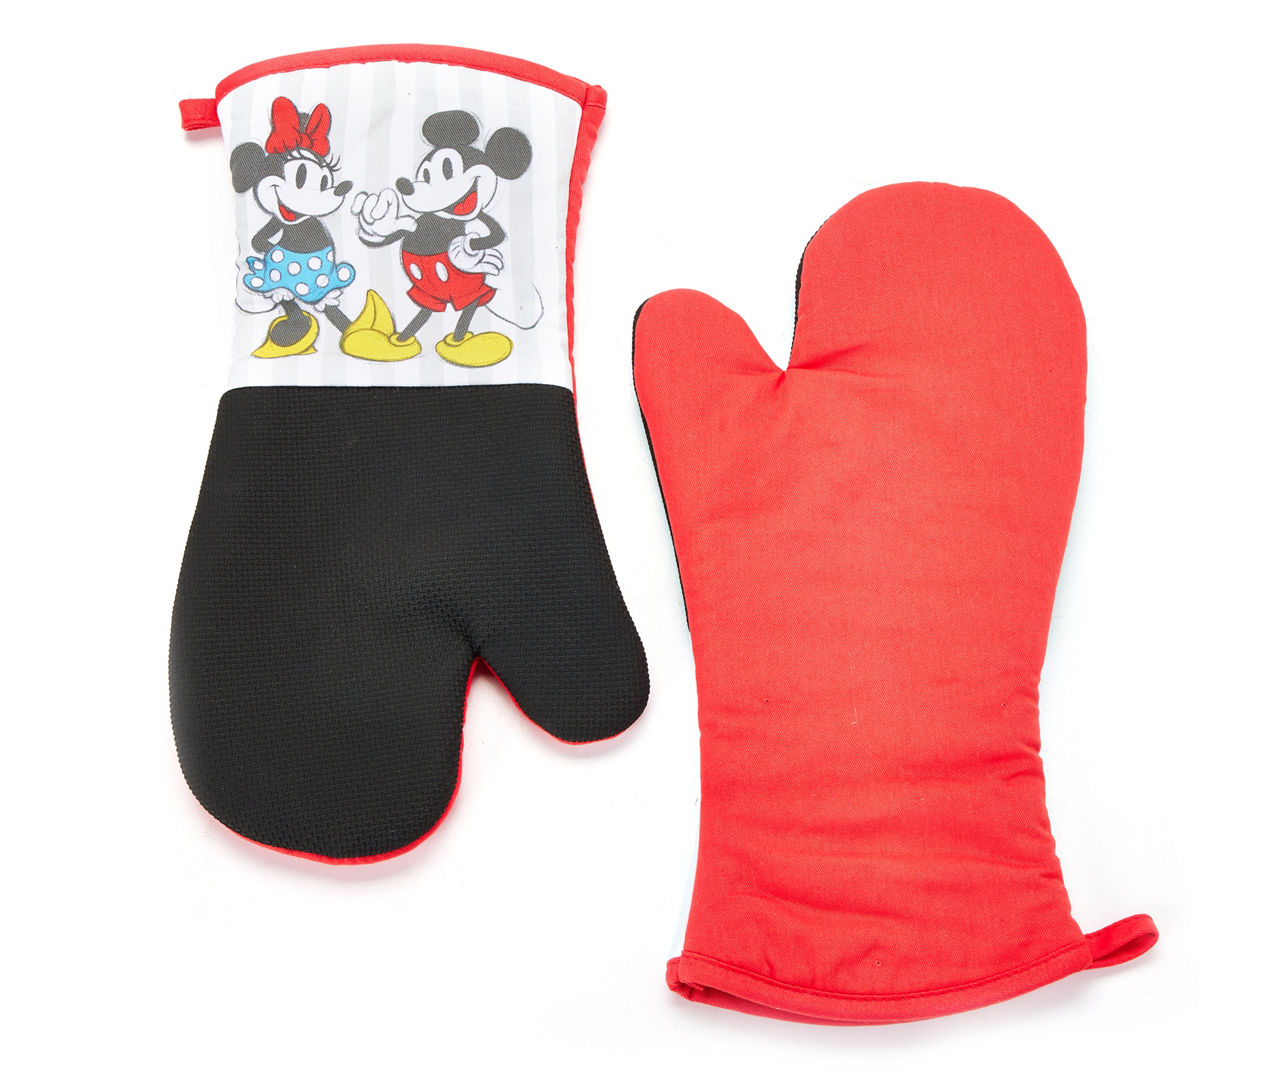 Disney Mickey Mouse 2pk Oversized Oven Mitts Mint-Green Black 13.75 x 7 in